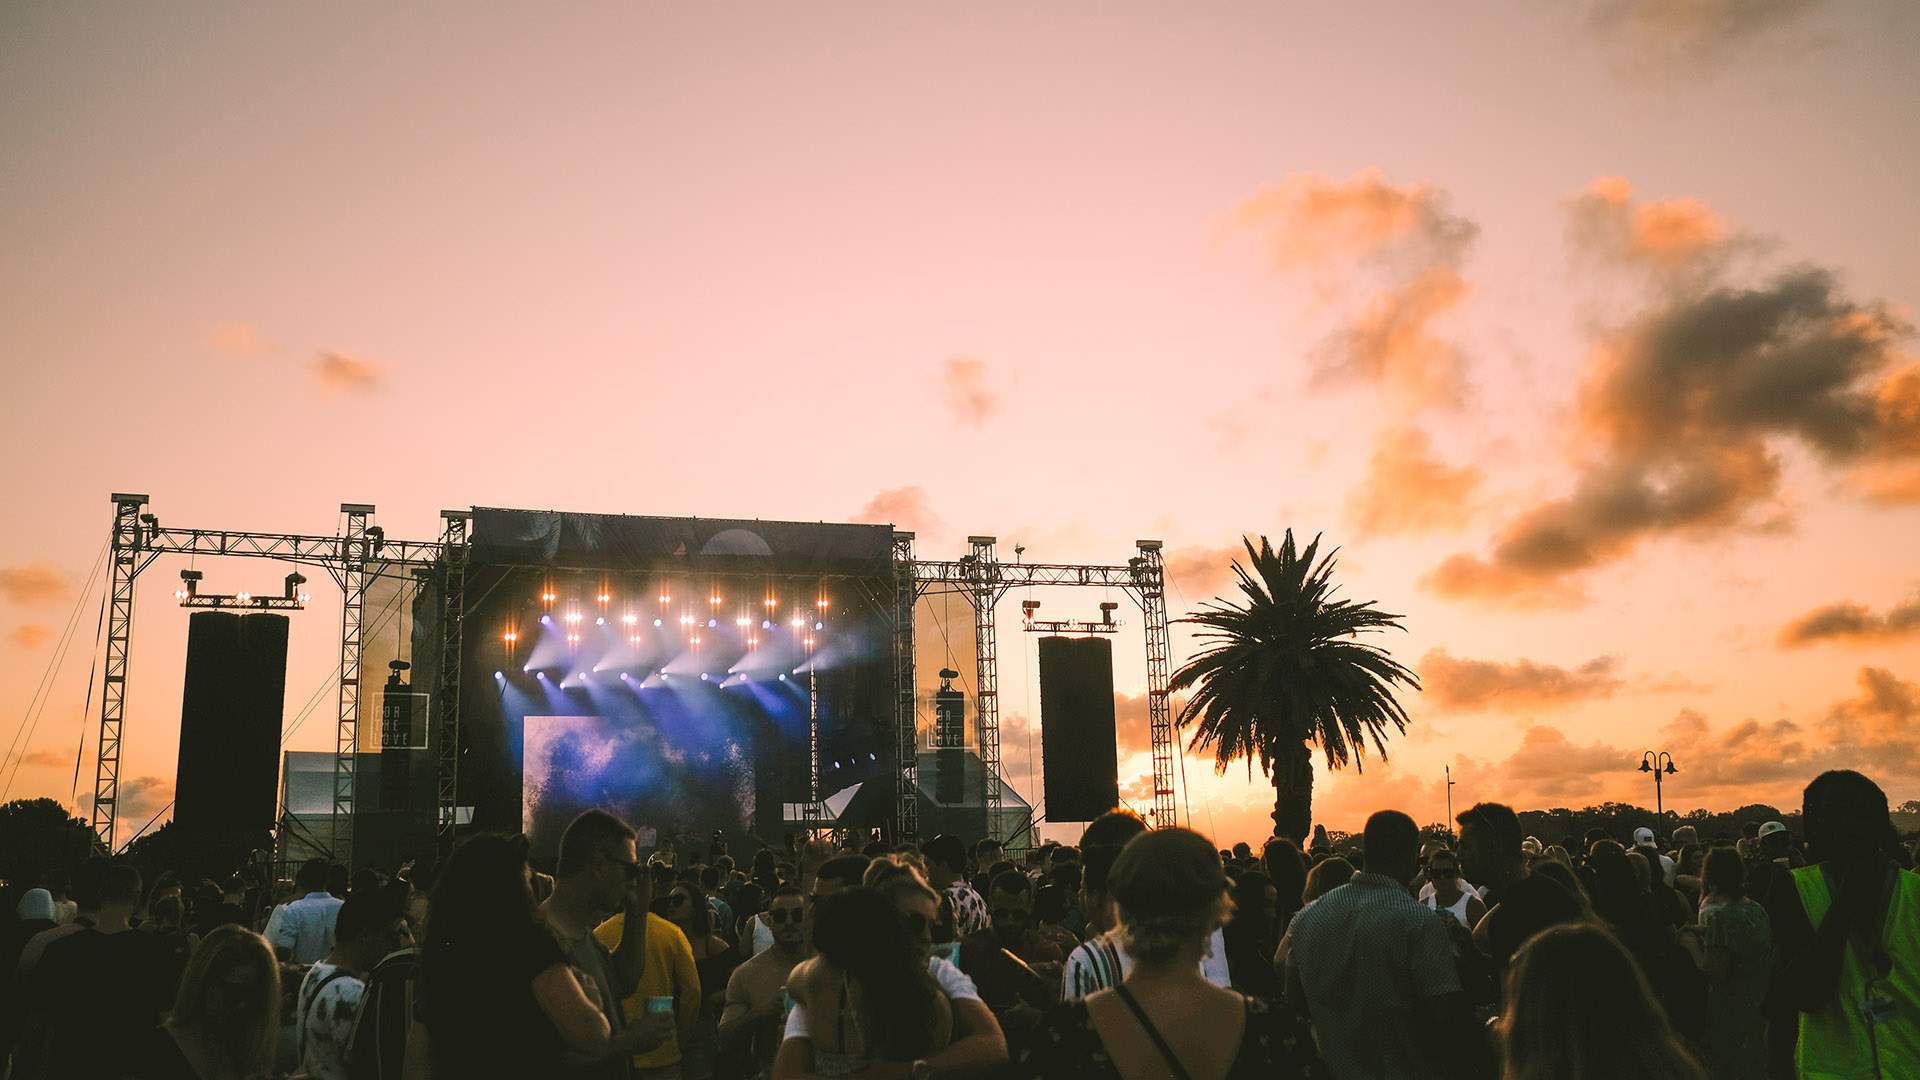 Charli XCX, Duke Dumont and Sonny Fodera Are Headlining For the Love's 2023 Waterfront Festivals